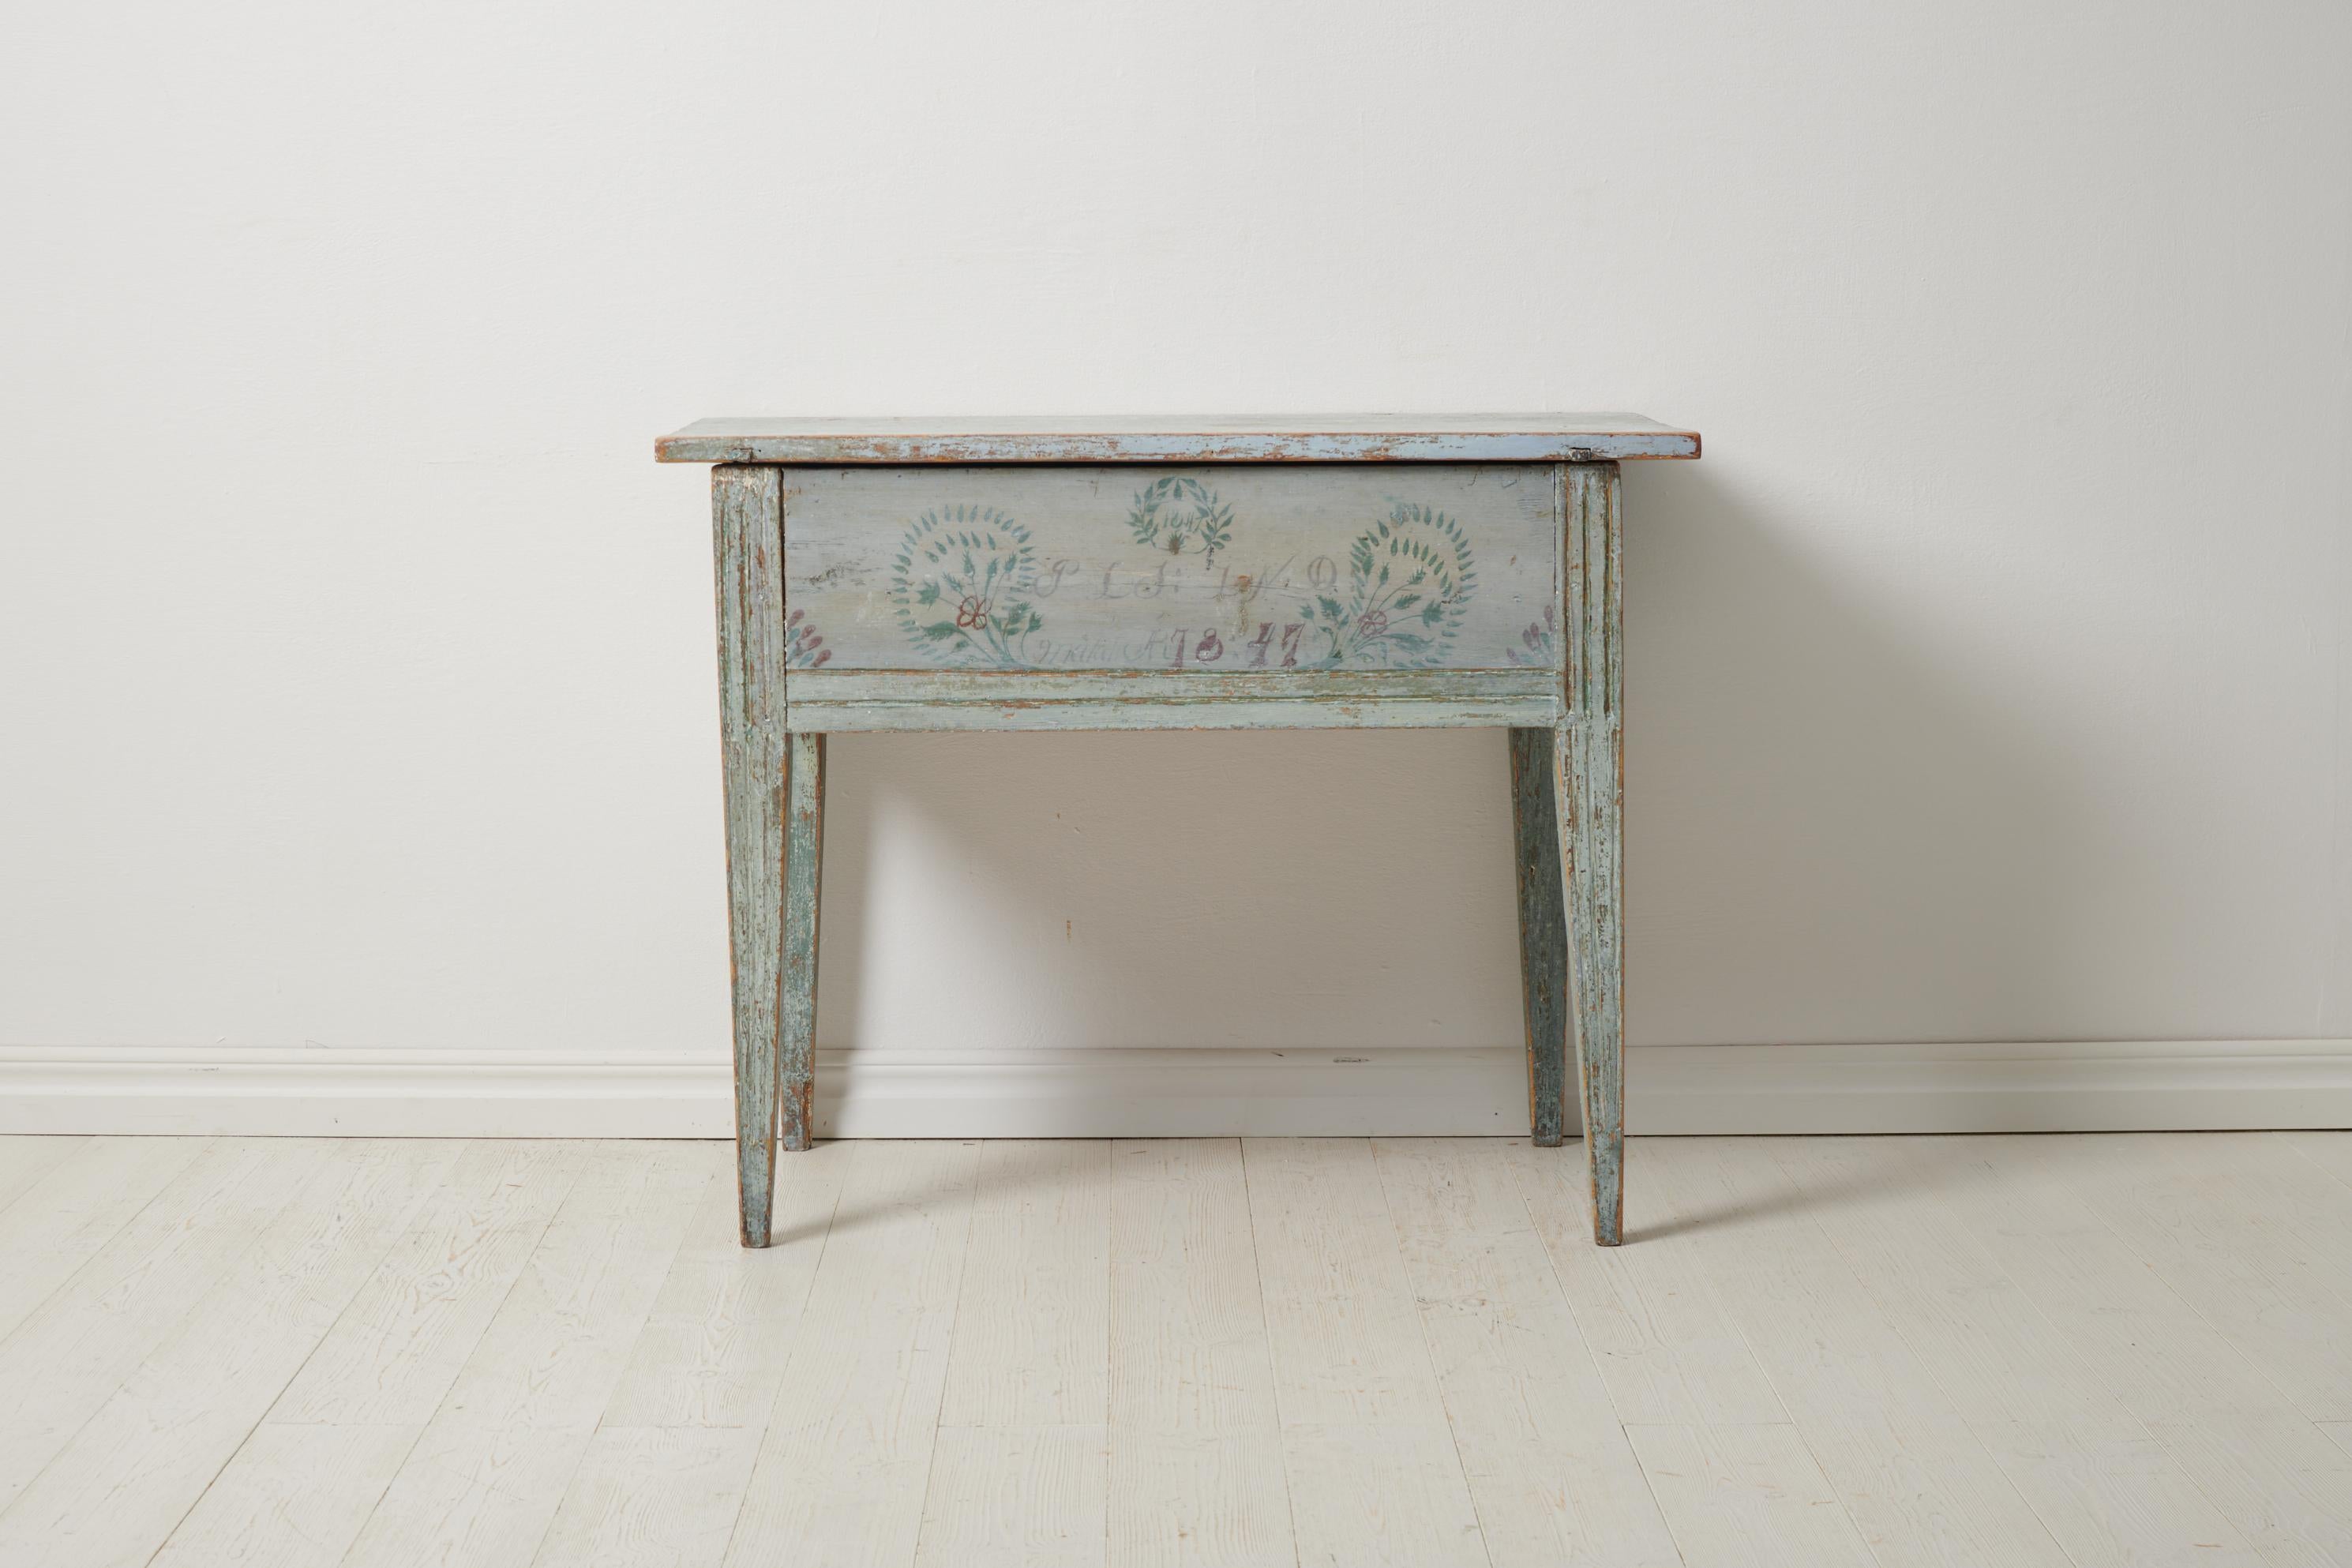 Rare antique country table from Sweden in folk art. The table is made in solid Swedish pine and is from the area Forsa in Hälsingland. The table has the original first layer of paint which has become distressed and rustic with time. Genuine patina.